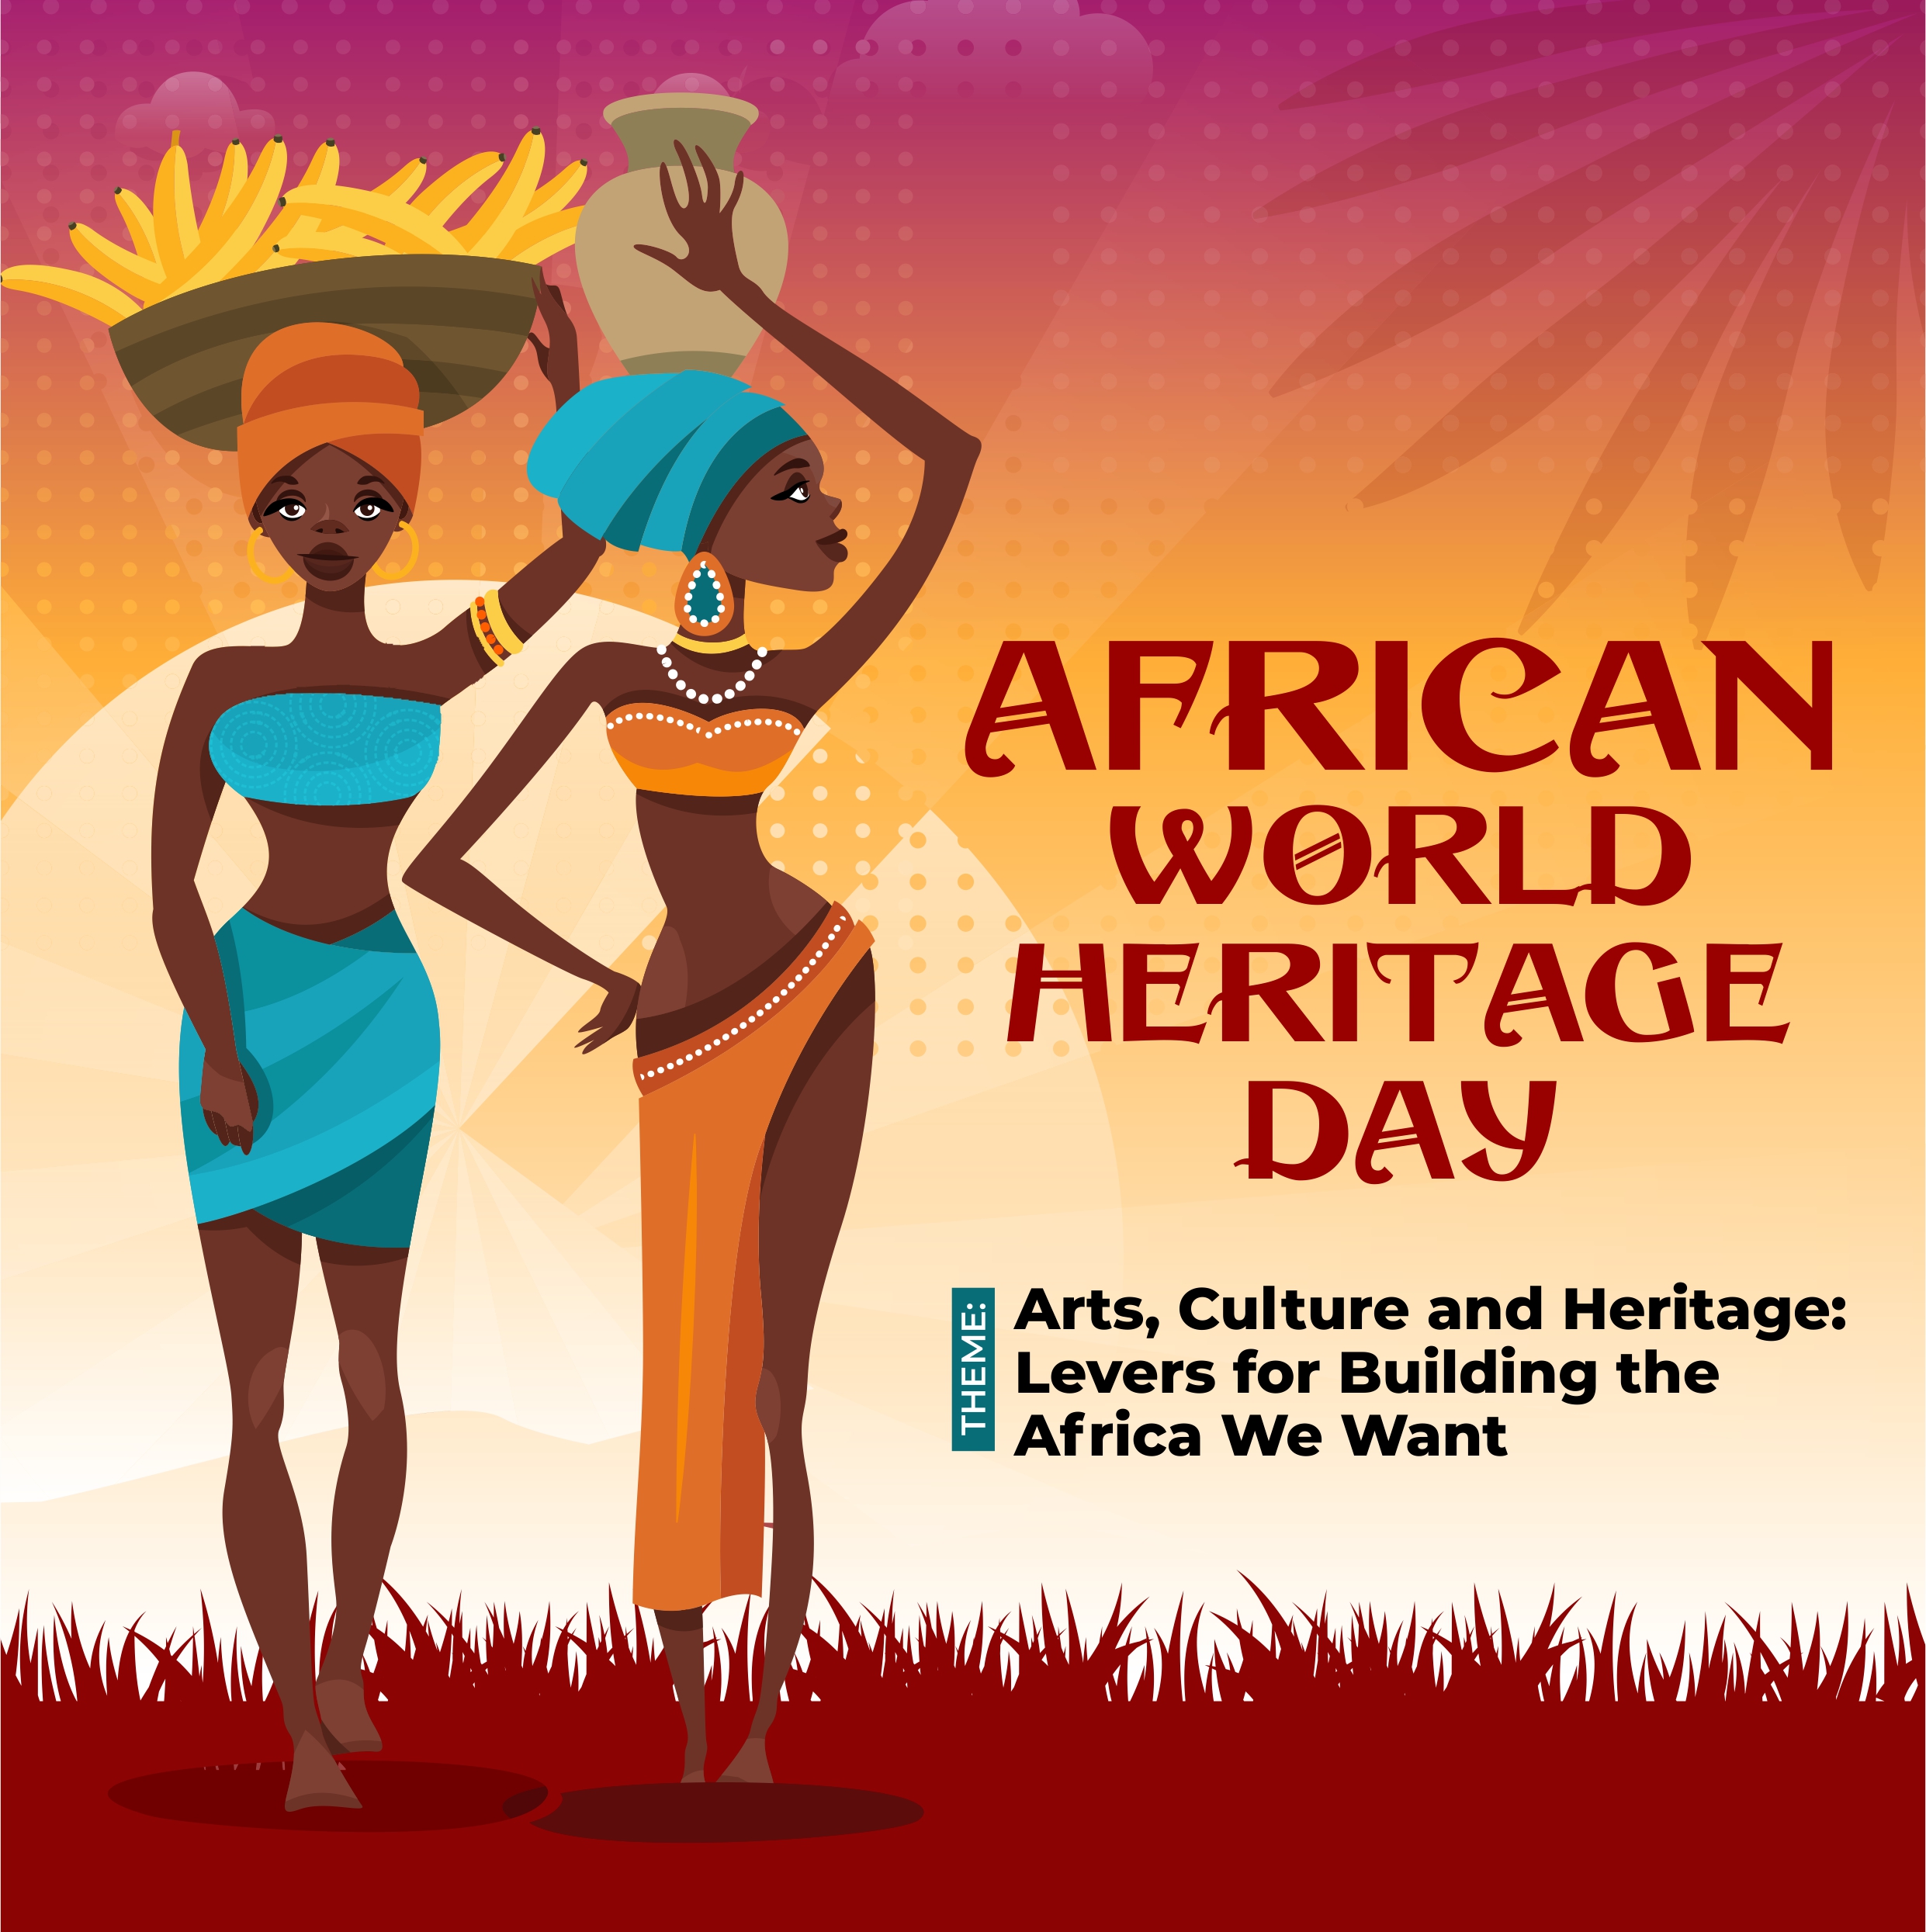 AFRICAN WORLD HERITAGE DAY 2021 Celebrating African Arts, Culture and